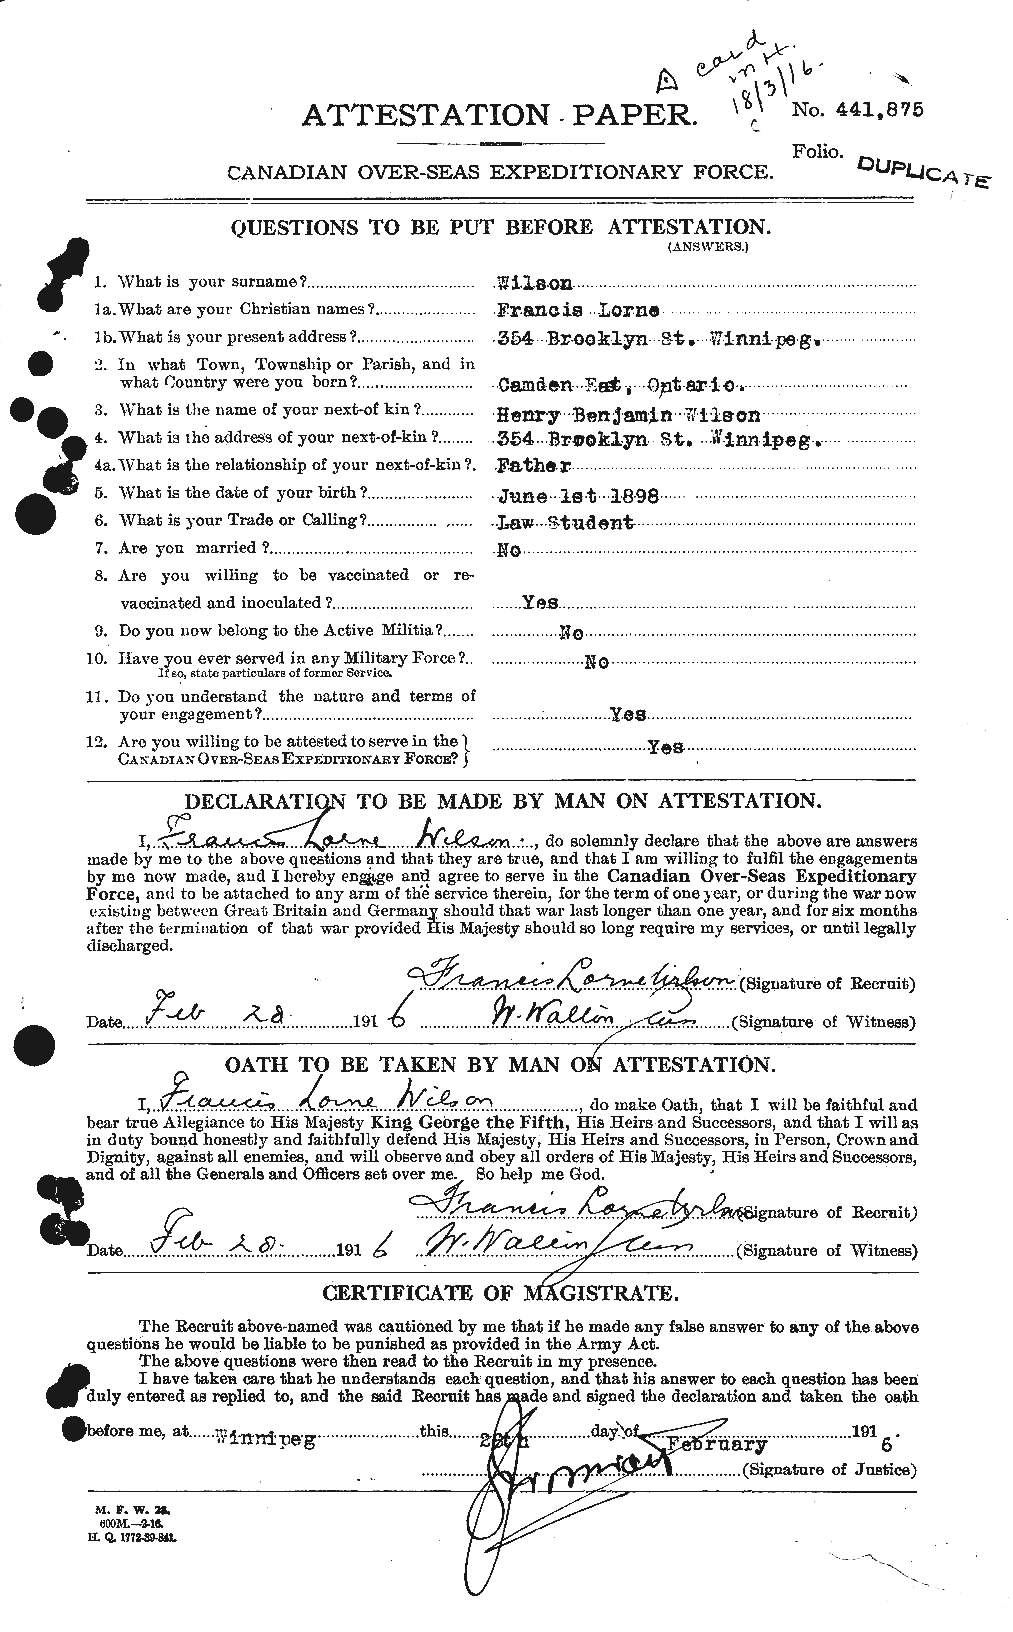 Personnel Records of the First World War - CEF 680624a